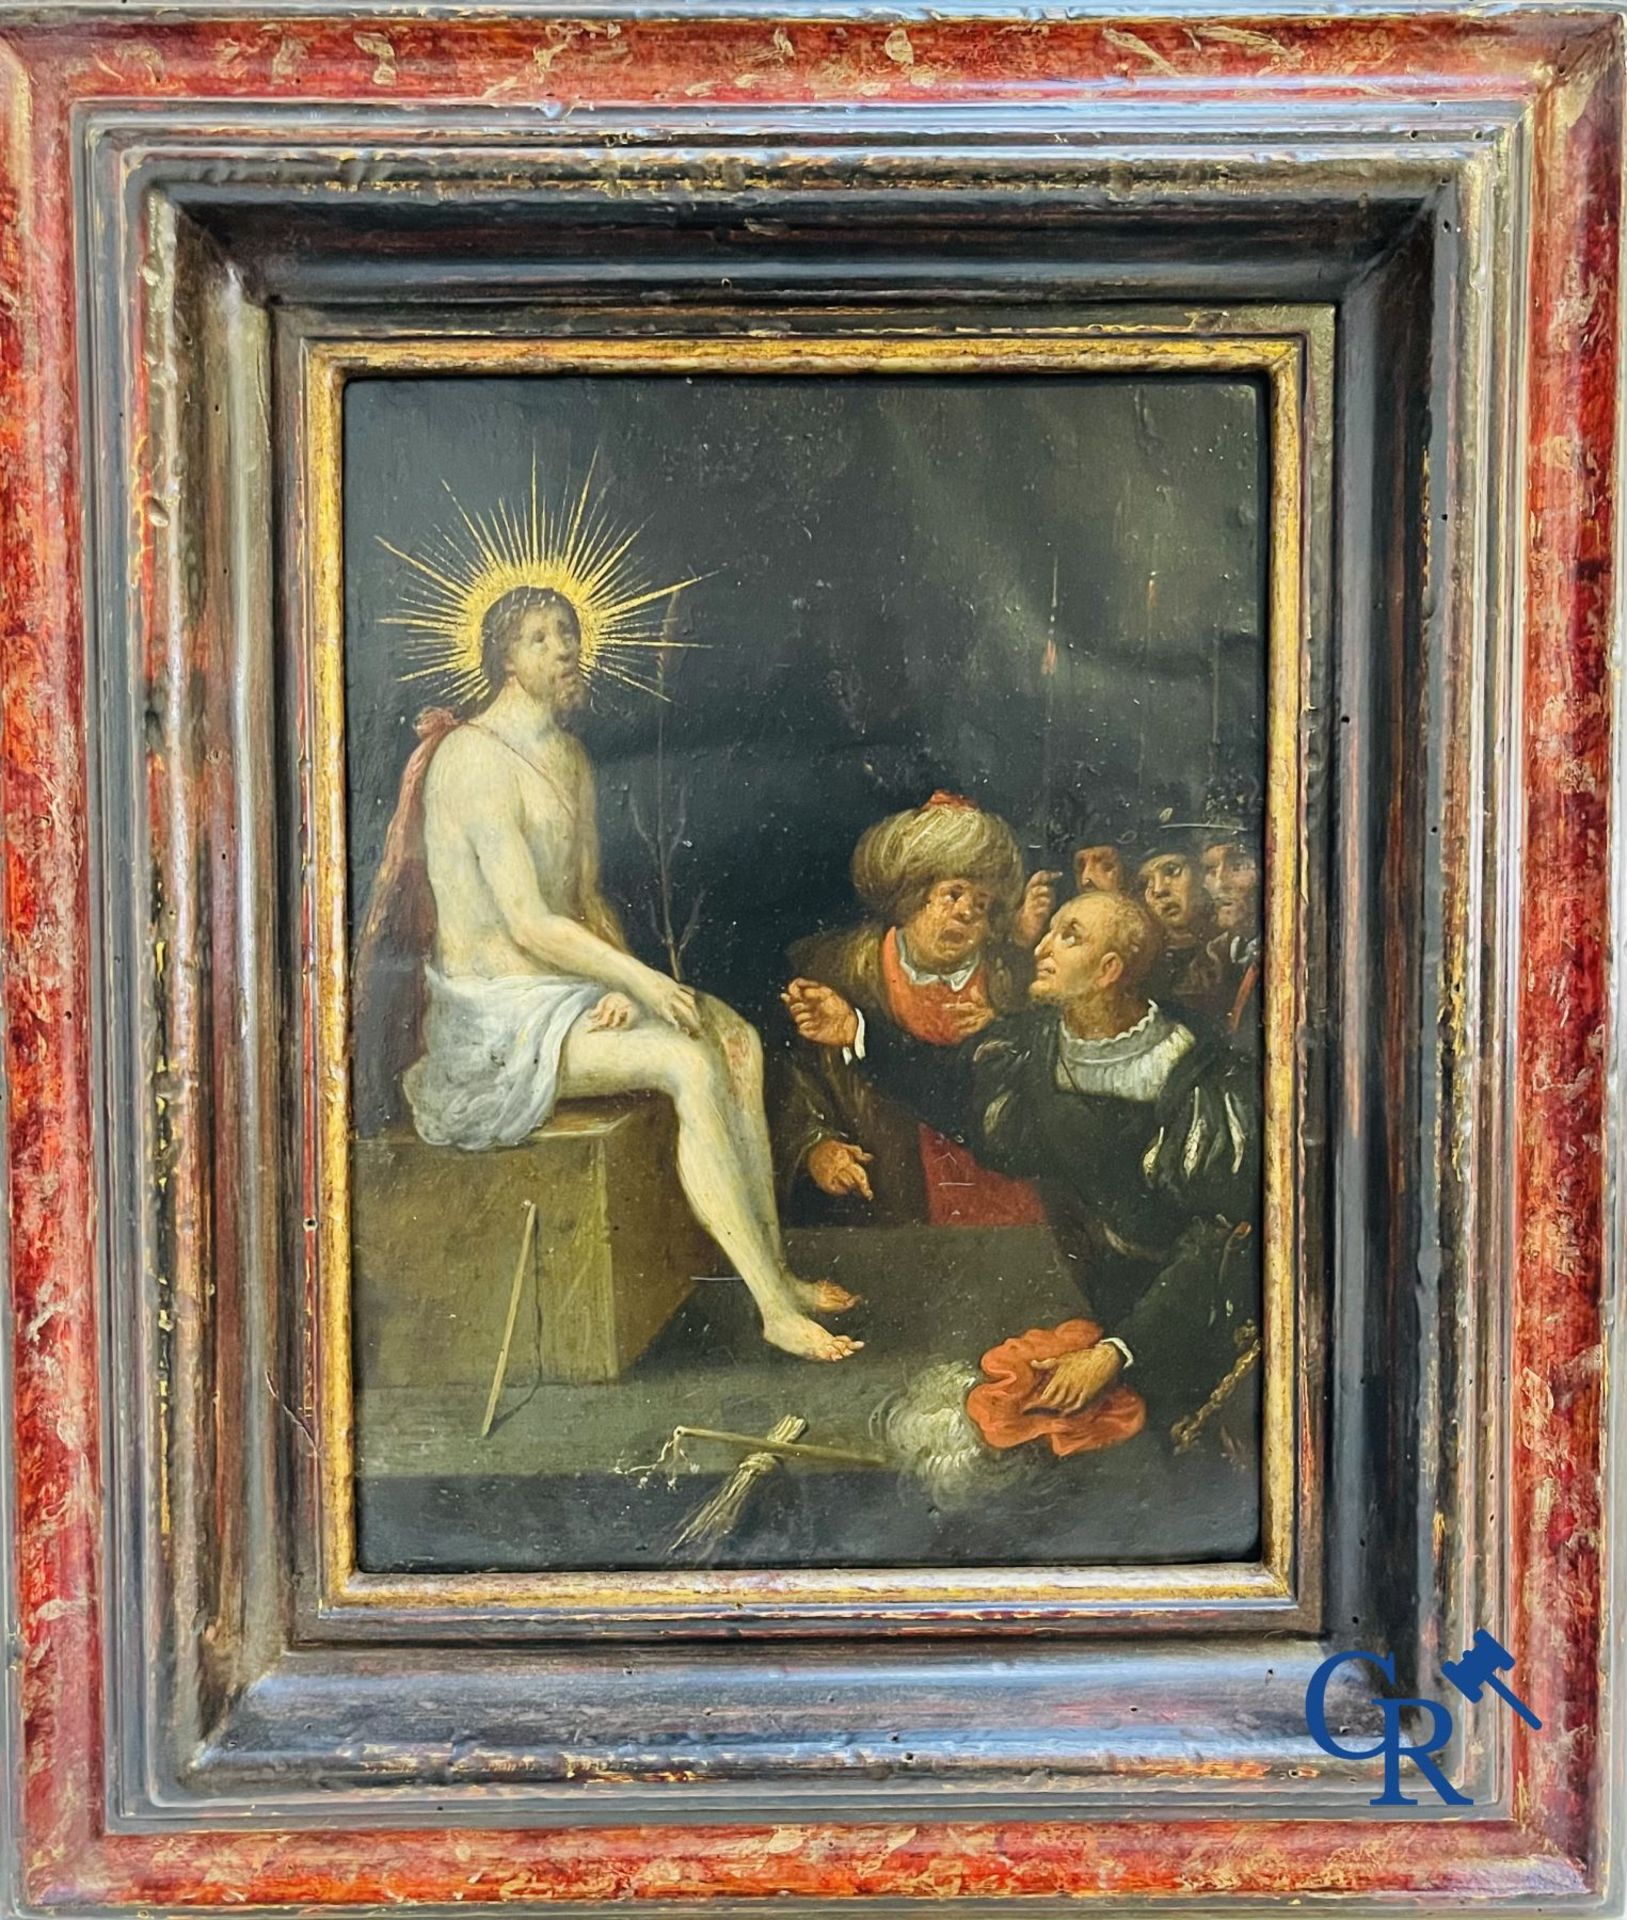 Painting: Antwerp, 16th century. The mockery of Christ. - Image 2 of 11